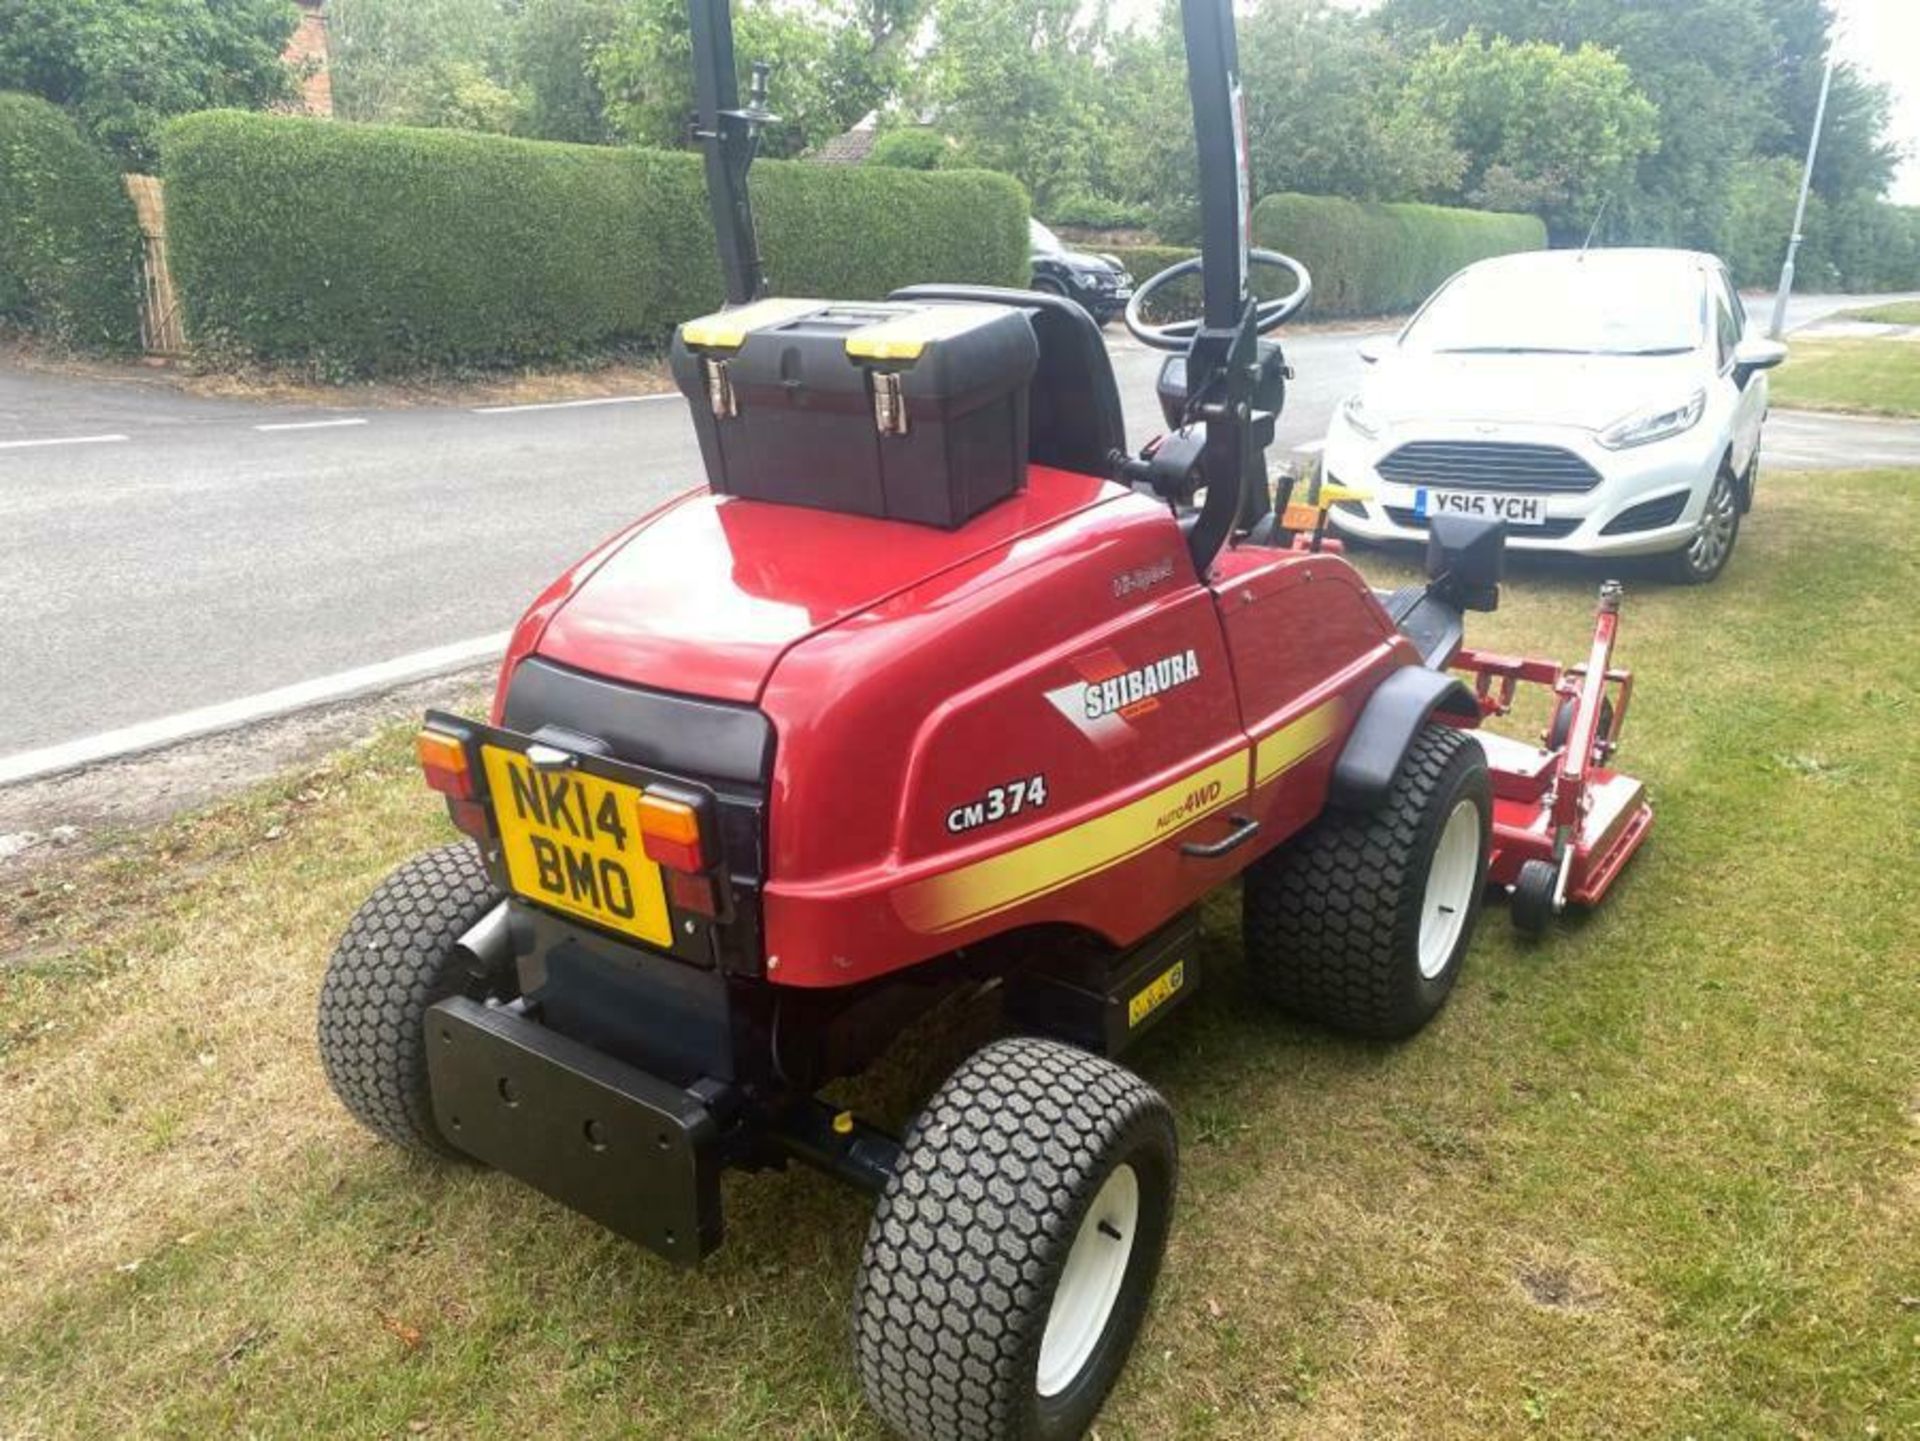 SHIBAURA CM374 UPFRONT ROTARY MOWER, 37HP, BRAND NEW 60" CUT DECK NEVER USED, DIESEL, YEAR 2014 - Image 5 of 5